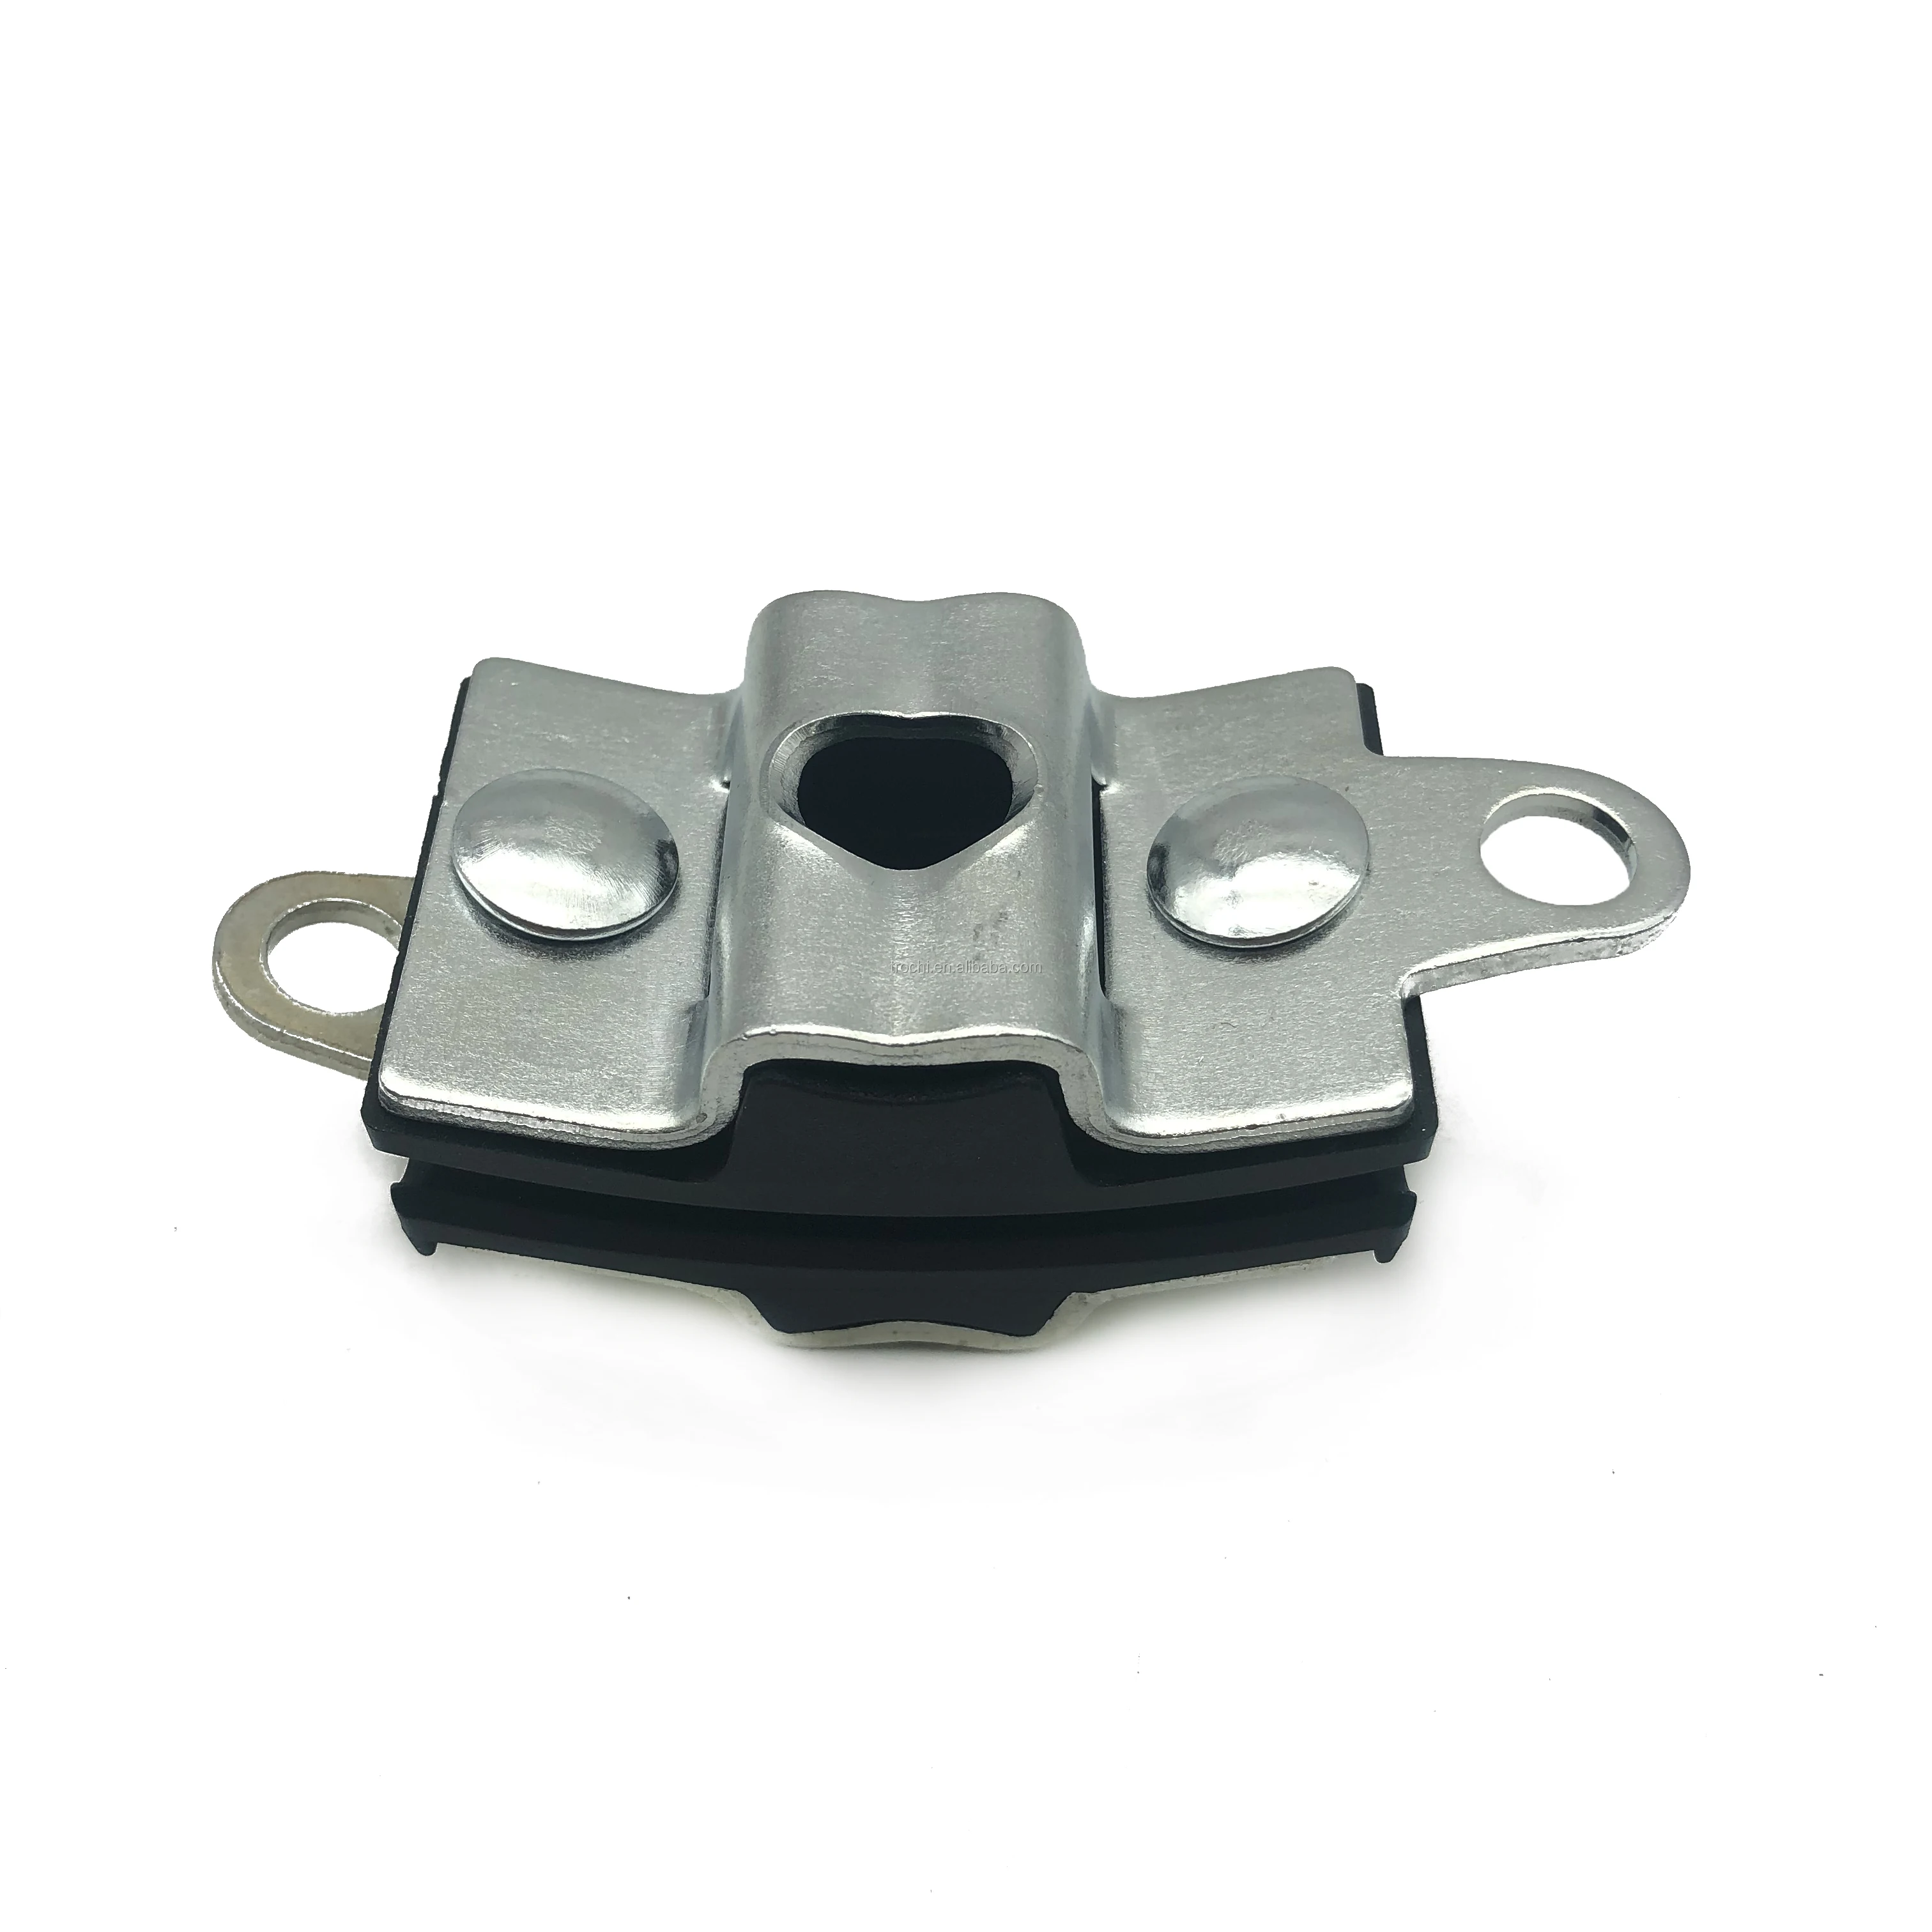 curved suspension clamp/clip for figure-8 fiber optic cable